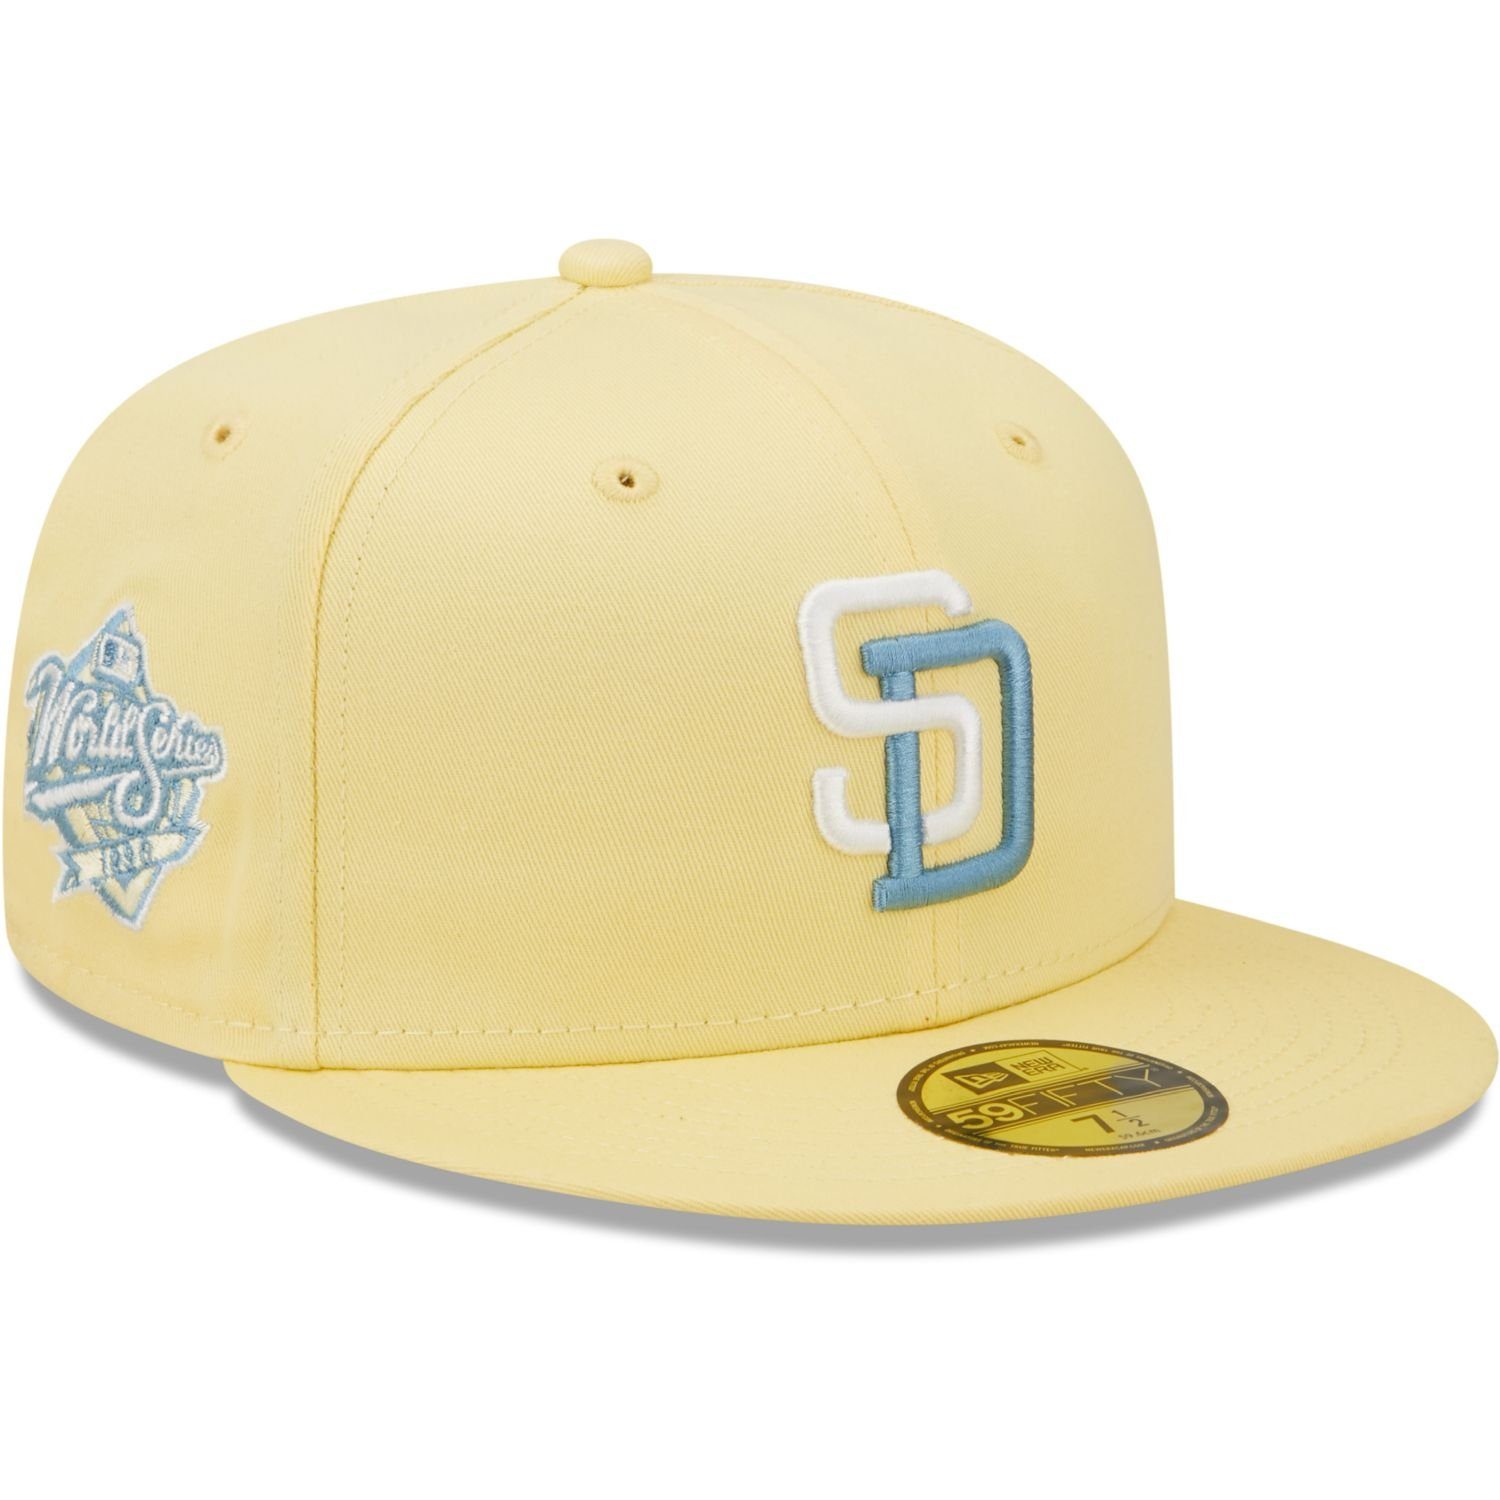 Era Padres San Cap COOPERSTOWN New 59Fifty Fitted Diego